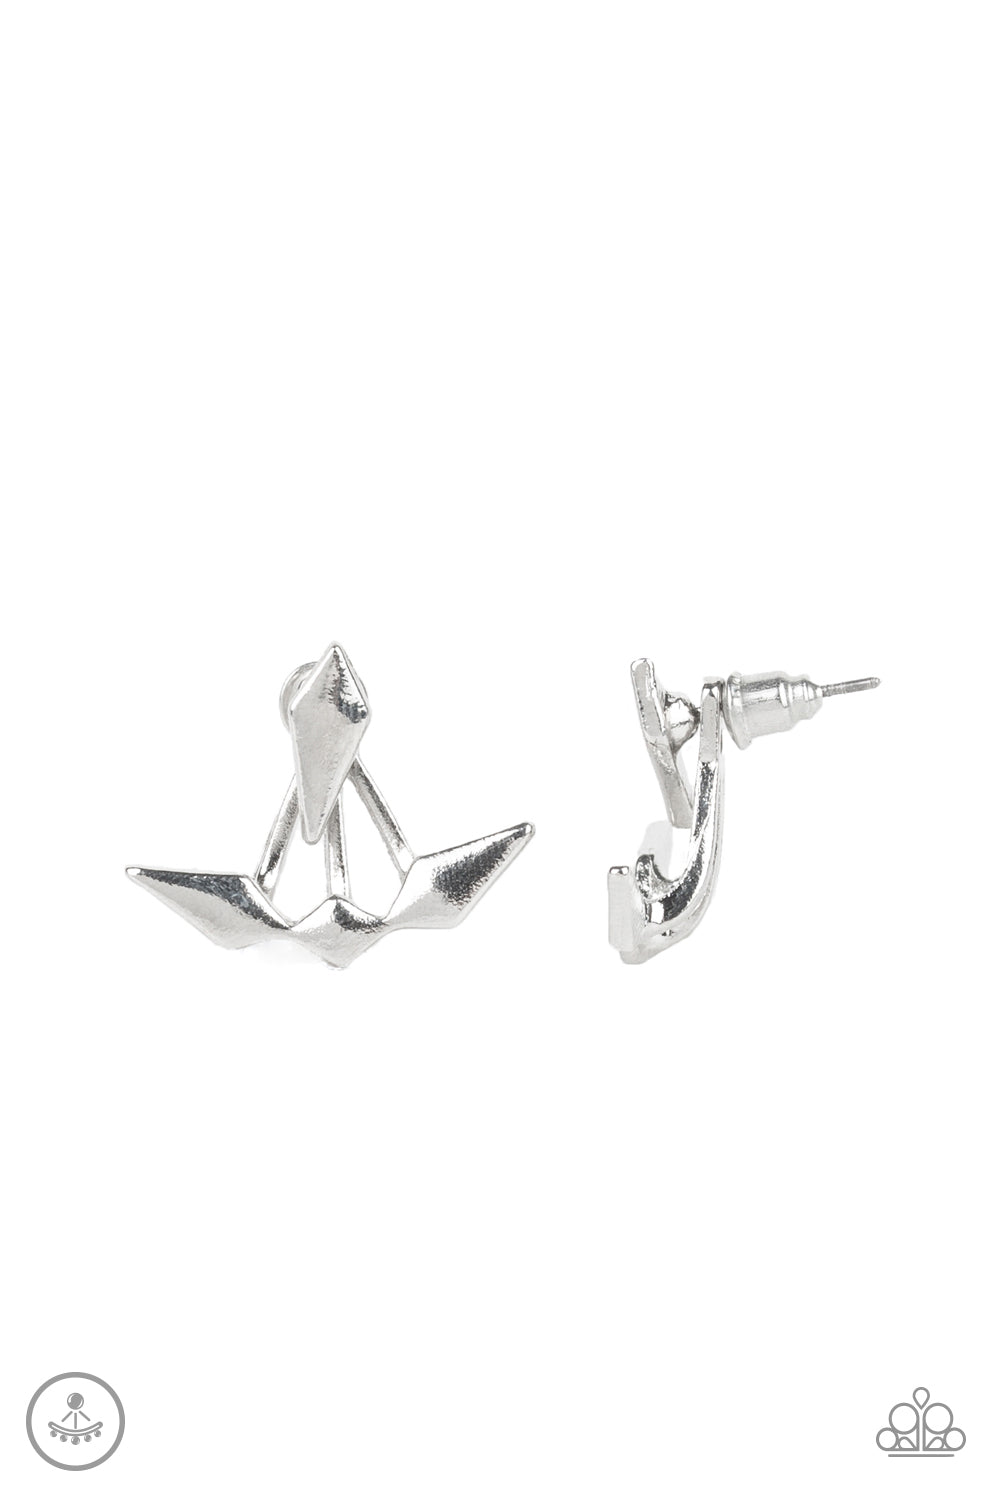 A solitaire silver kite-shaped frame attaches to a double-sided post, designed to fasten behind the ear. Infused with matching kite-shaped frames, the double sided-post peeks out beneath the ear for an edgy look. Earring attaches to a standard post fitting.  Sold as one pair of jacket earrings.